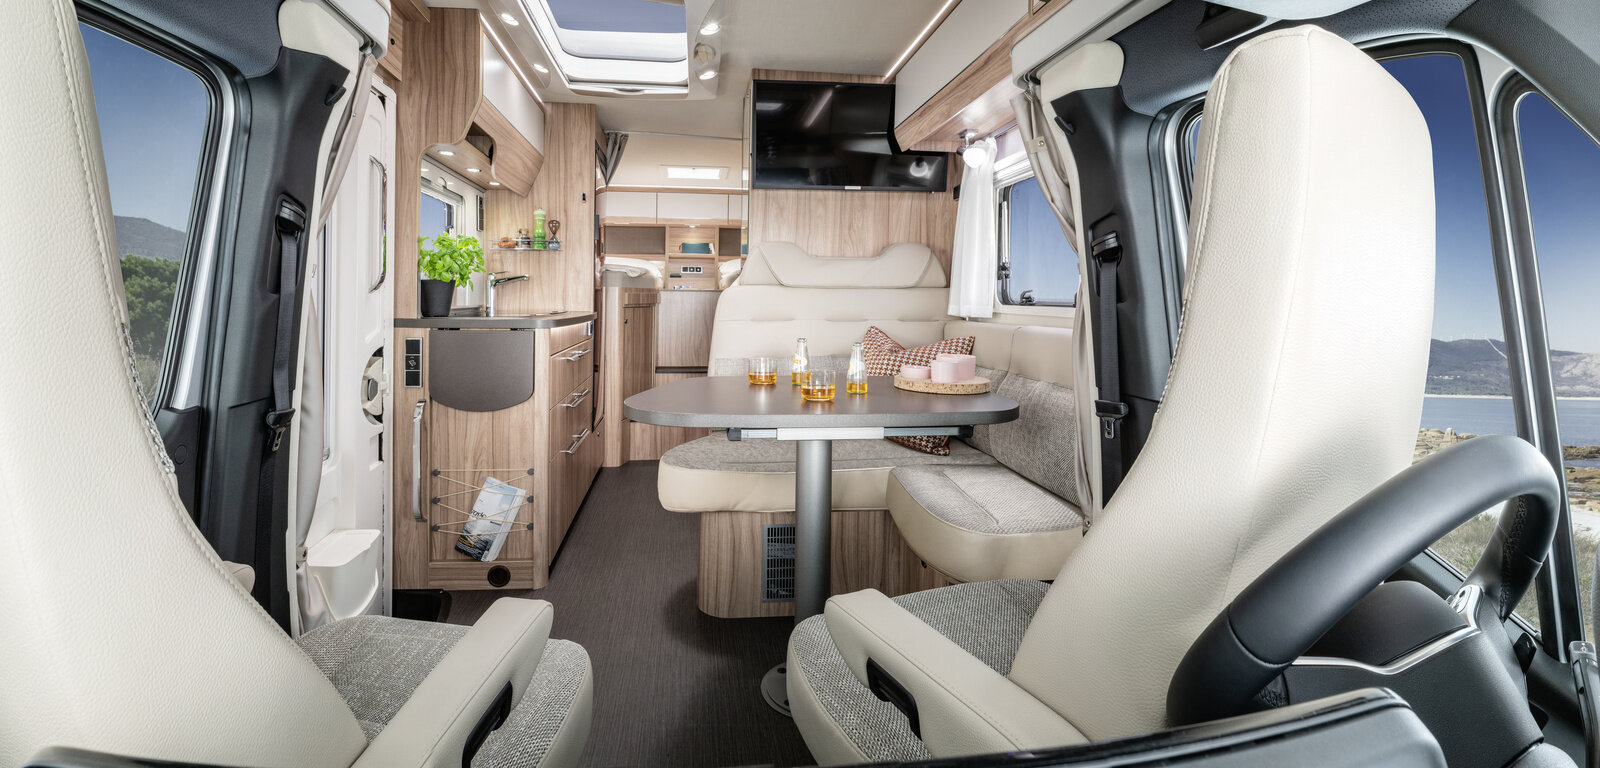 Bright living room in the HYMER ML-T 570 with driver's seats, seating area, plasma TV, entrance door, kitchen block and sleeping area